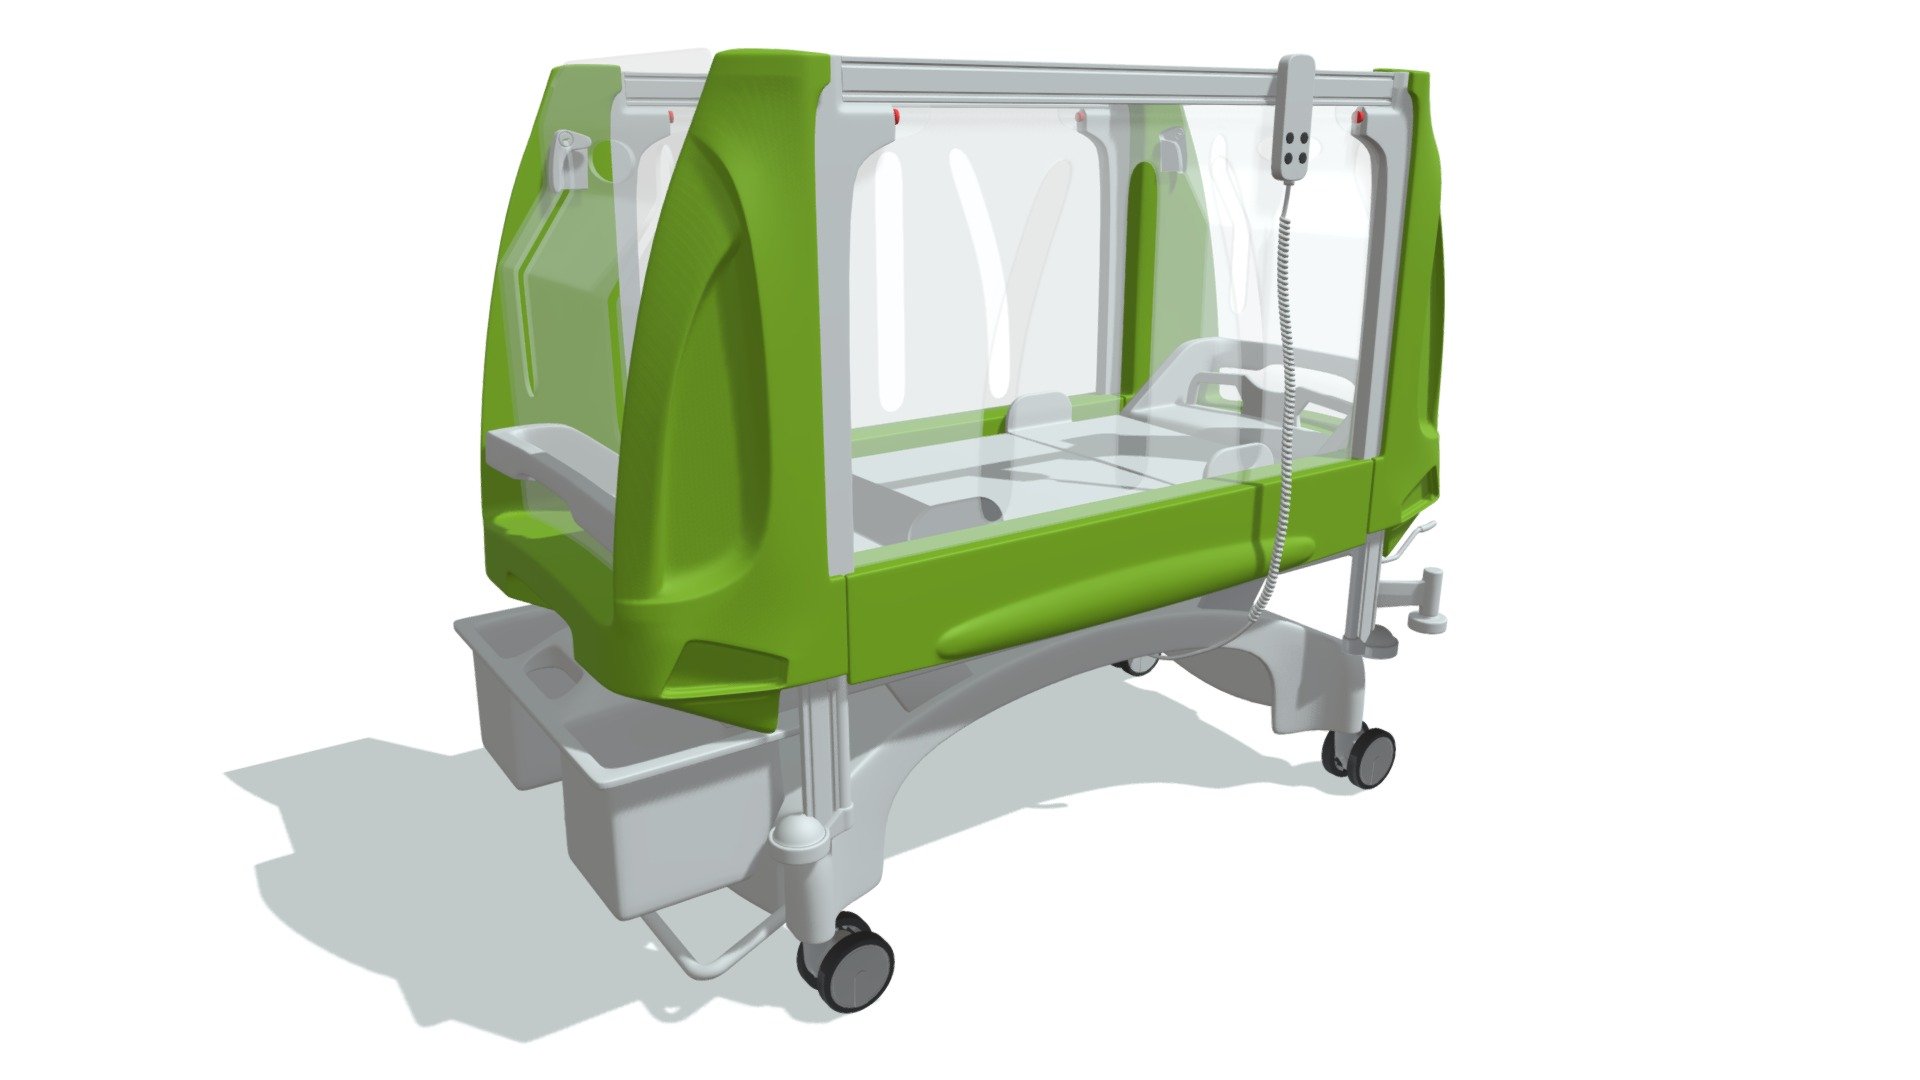 High quality 3d model of pediatric medical hospital bed.
Colors can be easily modified 3d model